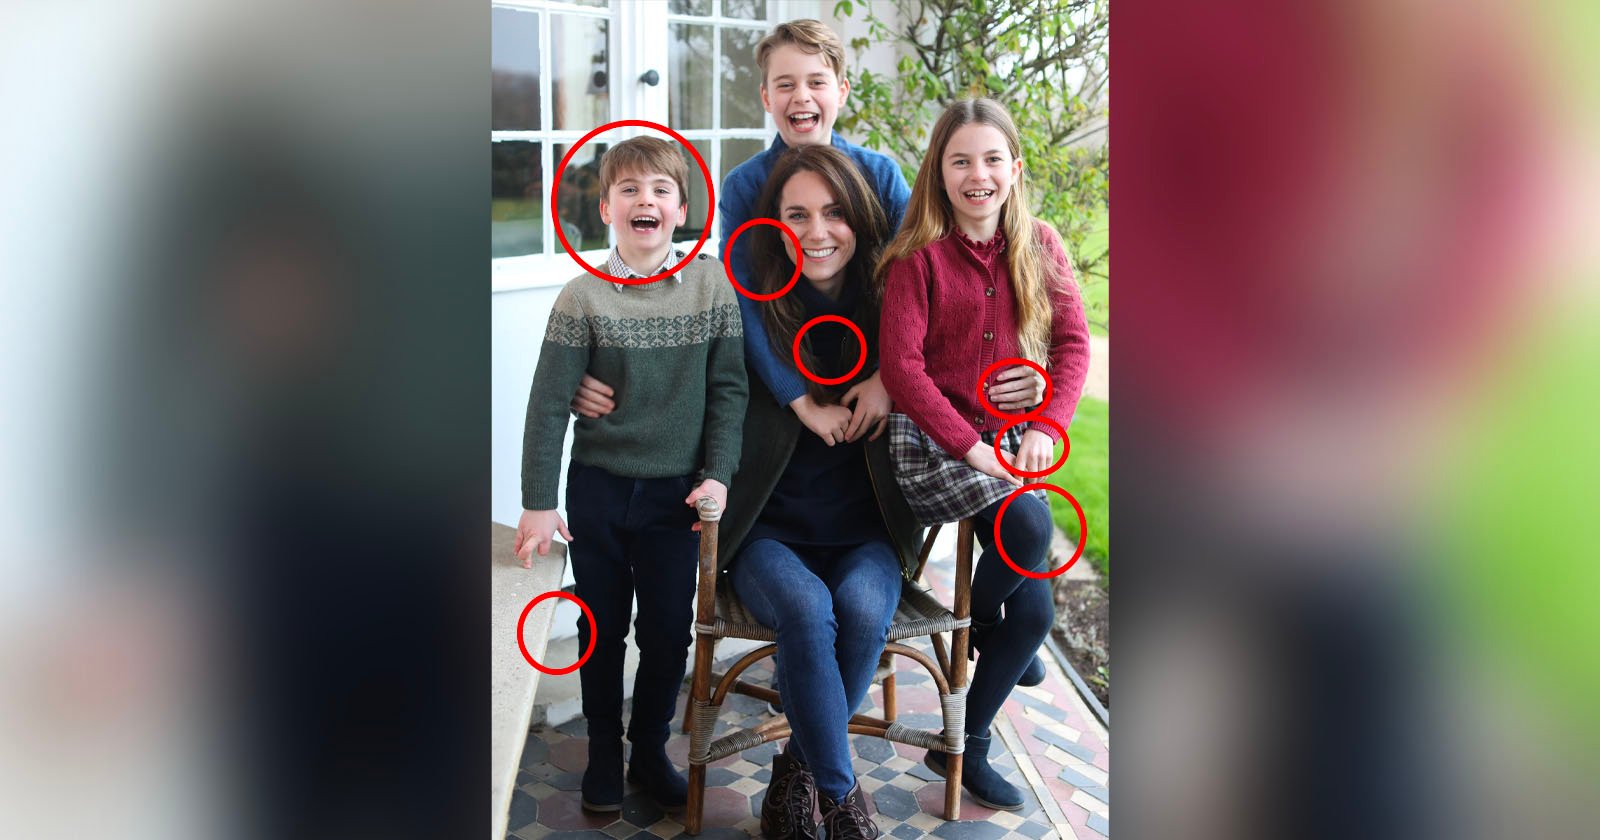 All The Inconsistencies and Editing Mistakes in Kate Middleton’s Photo